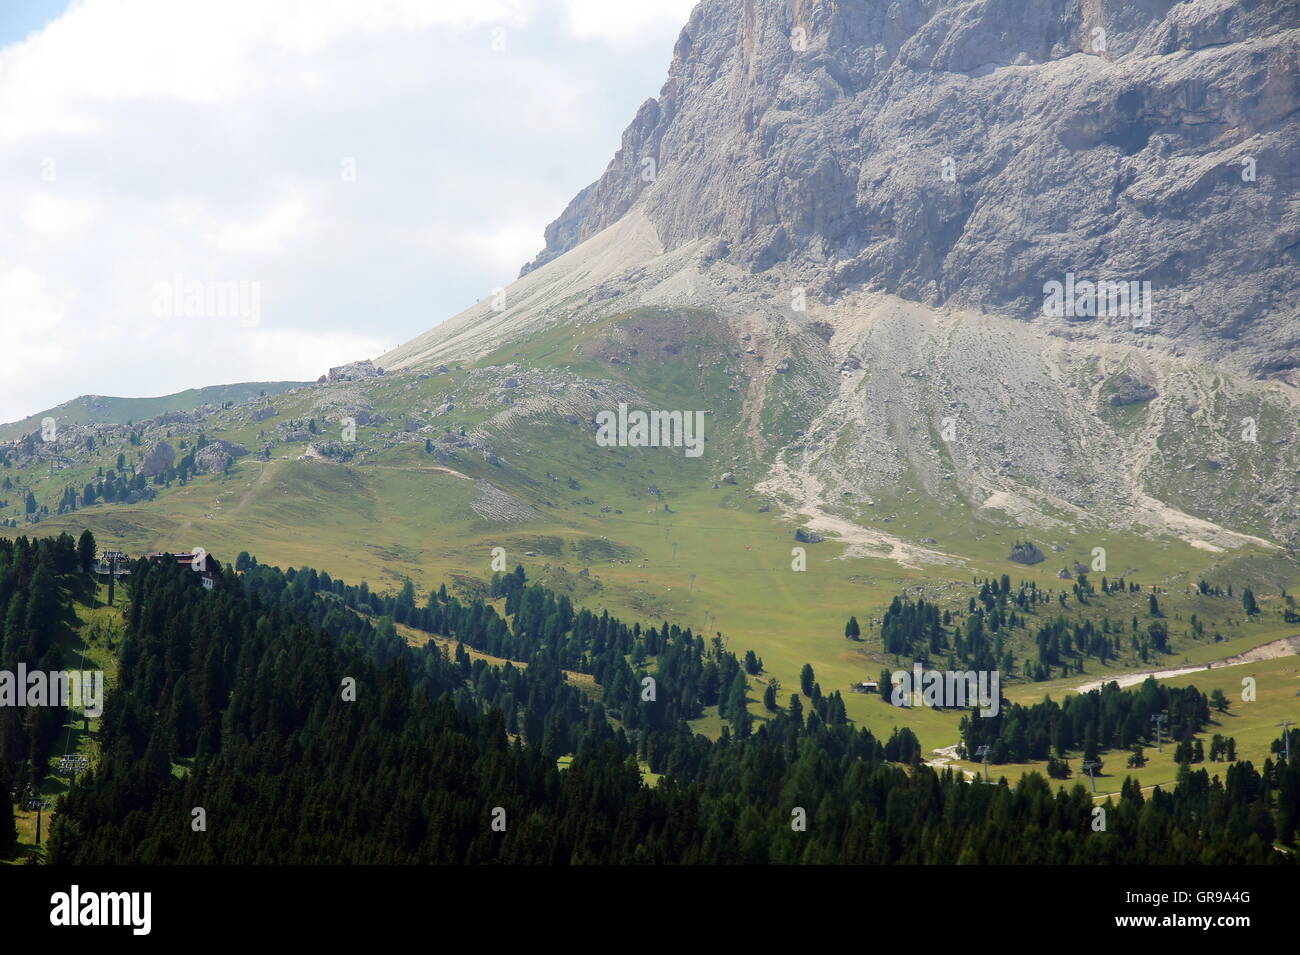 Mountain Landscape At The Foot Of The Sella Massif Stock Photo